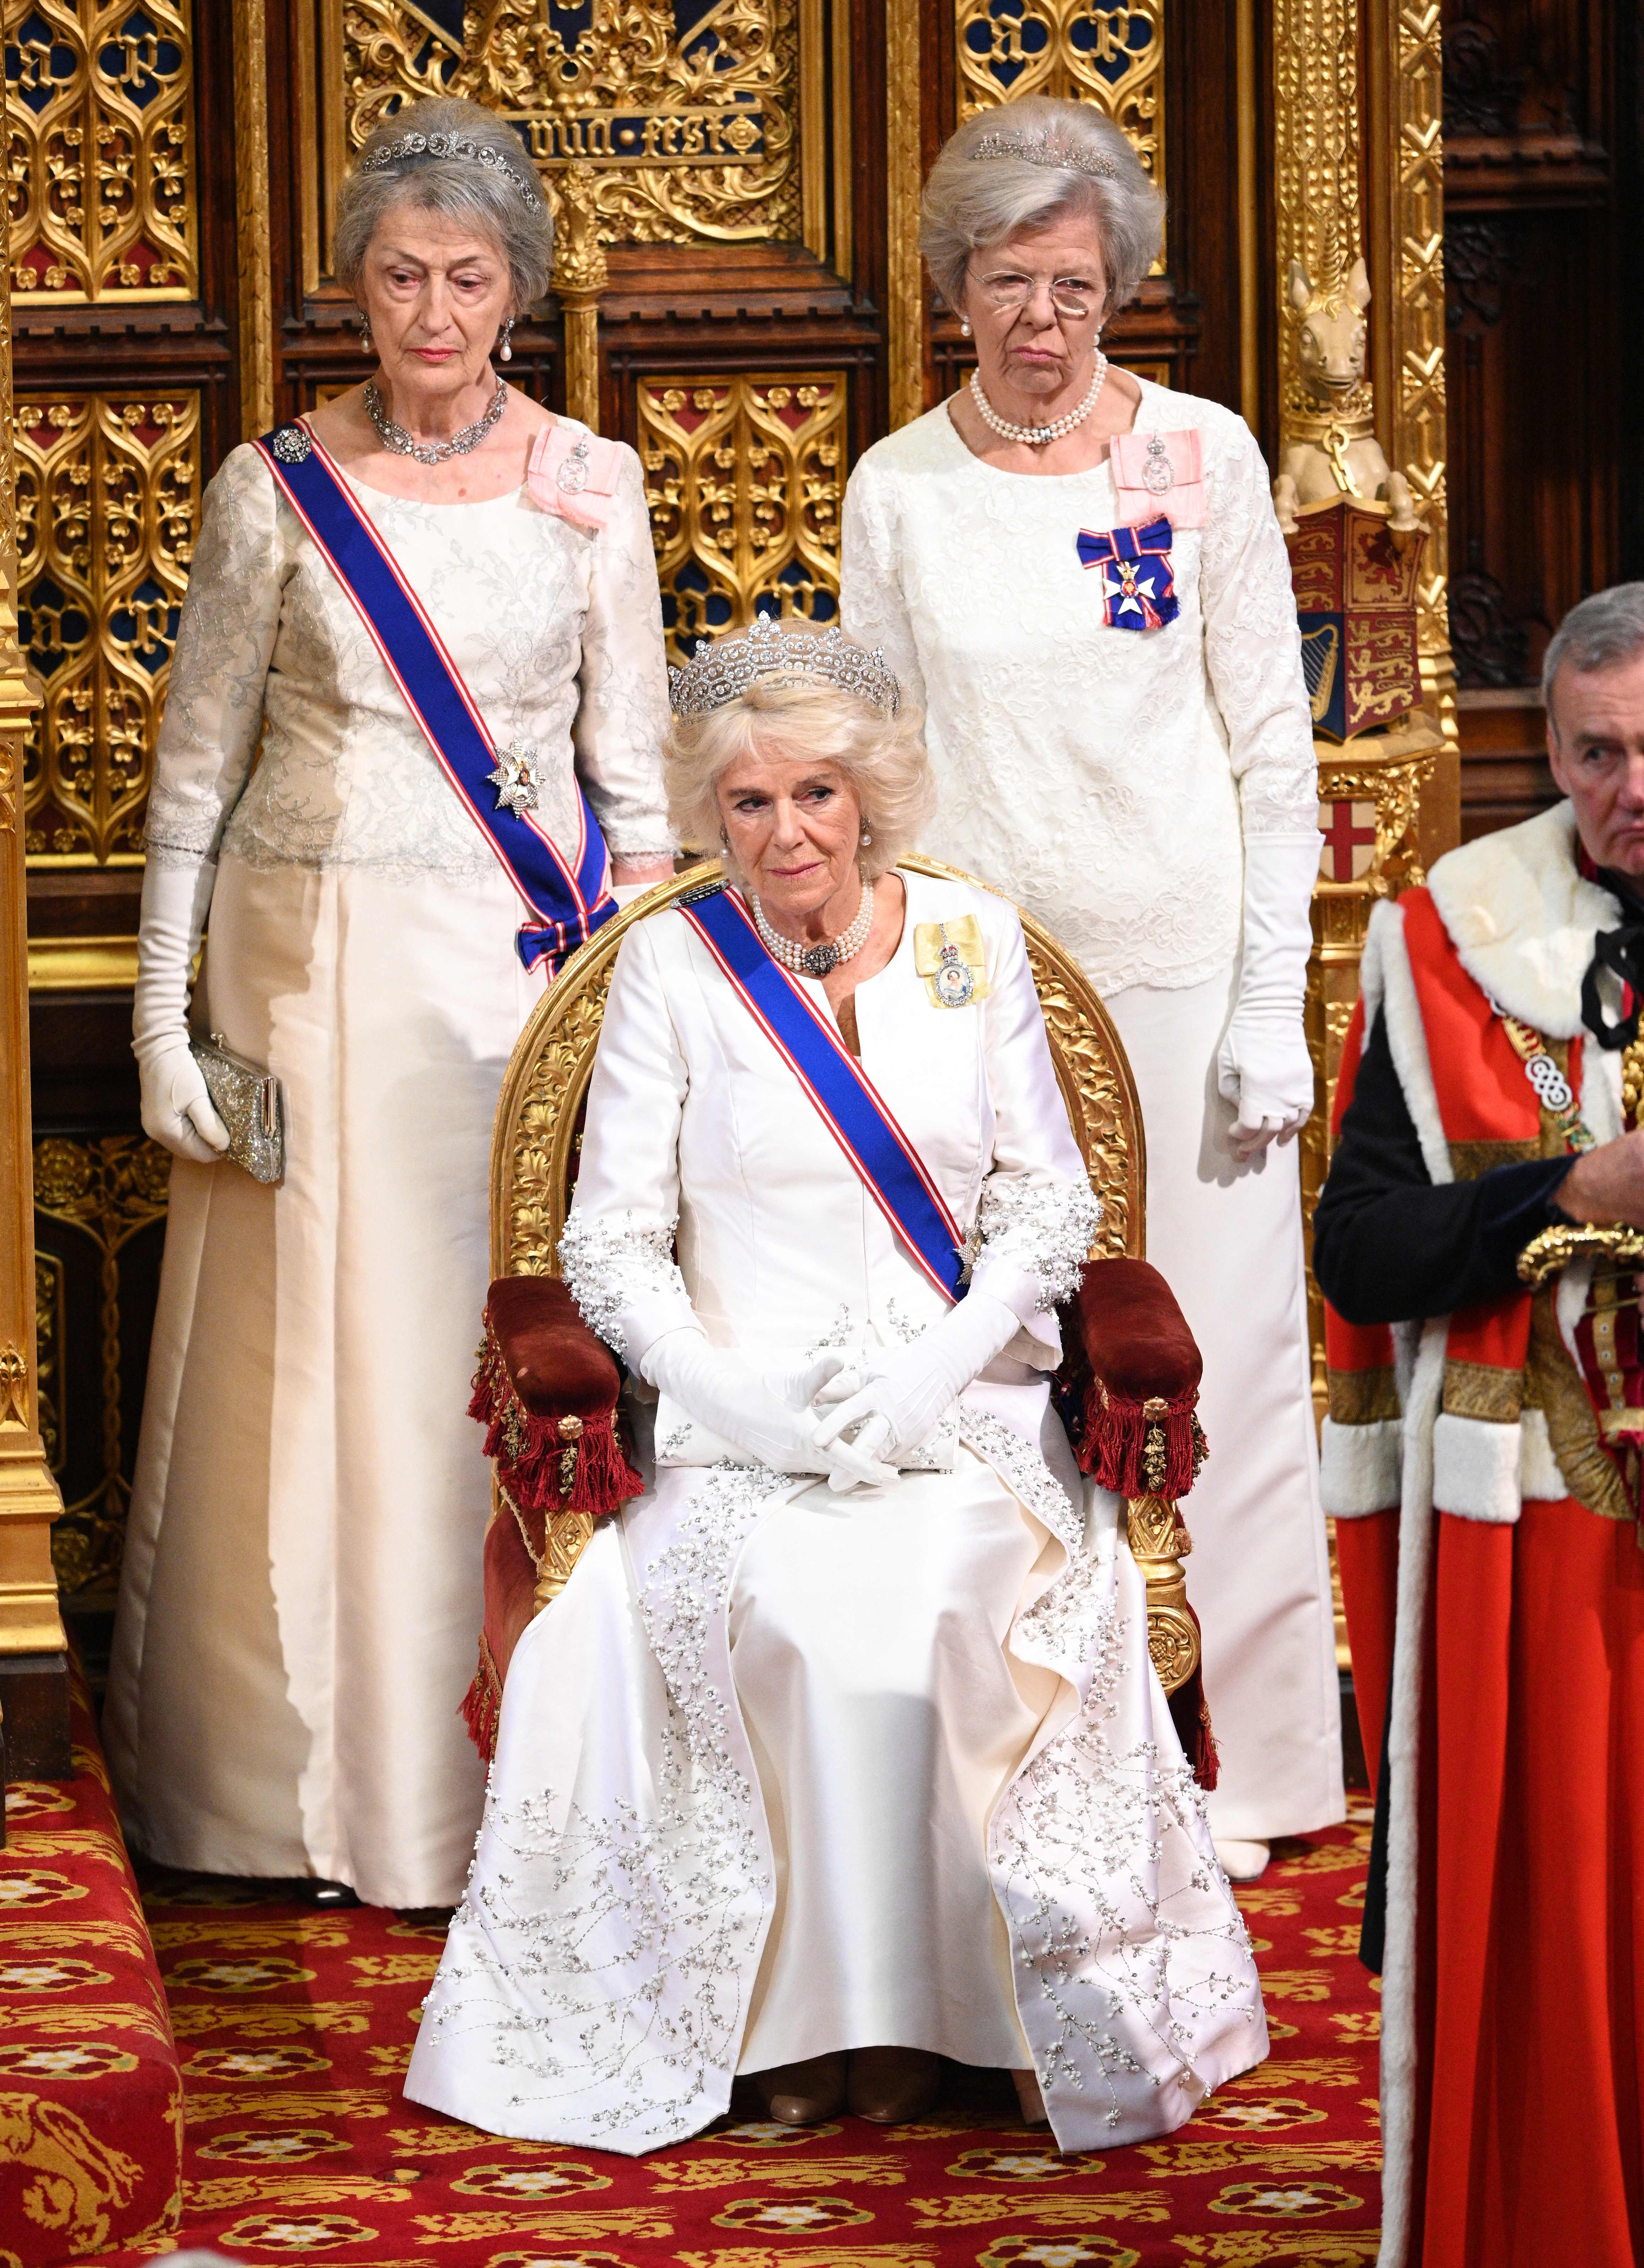 Lady Susan Hussey (left) attends State Opening of Parliament, 2019